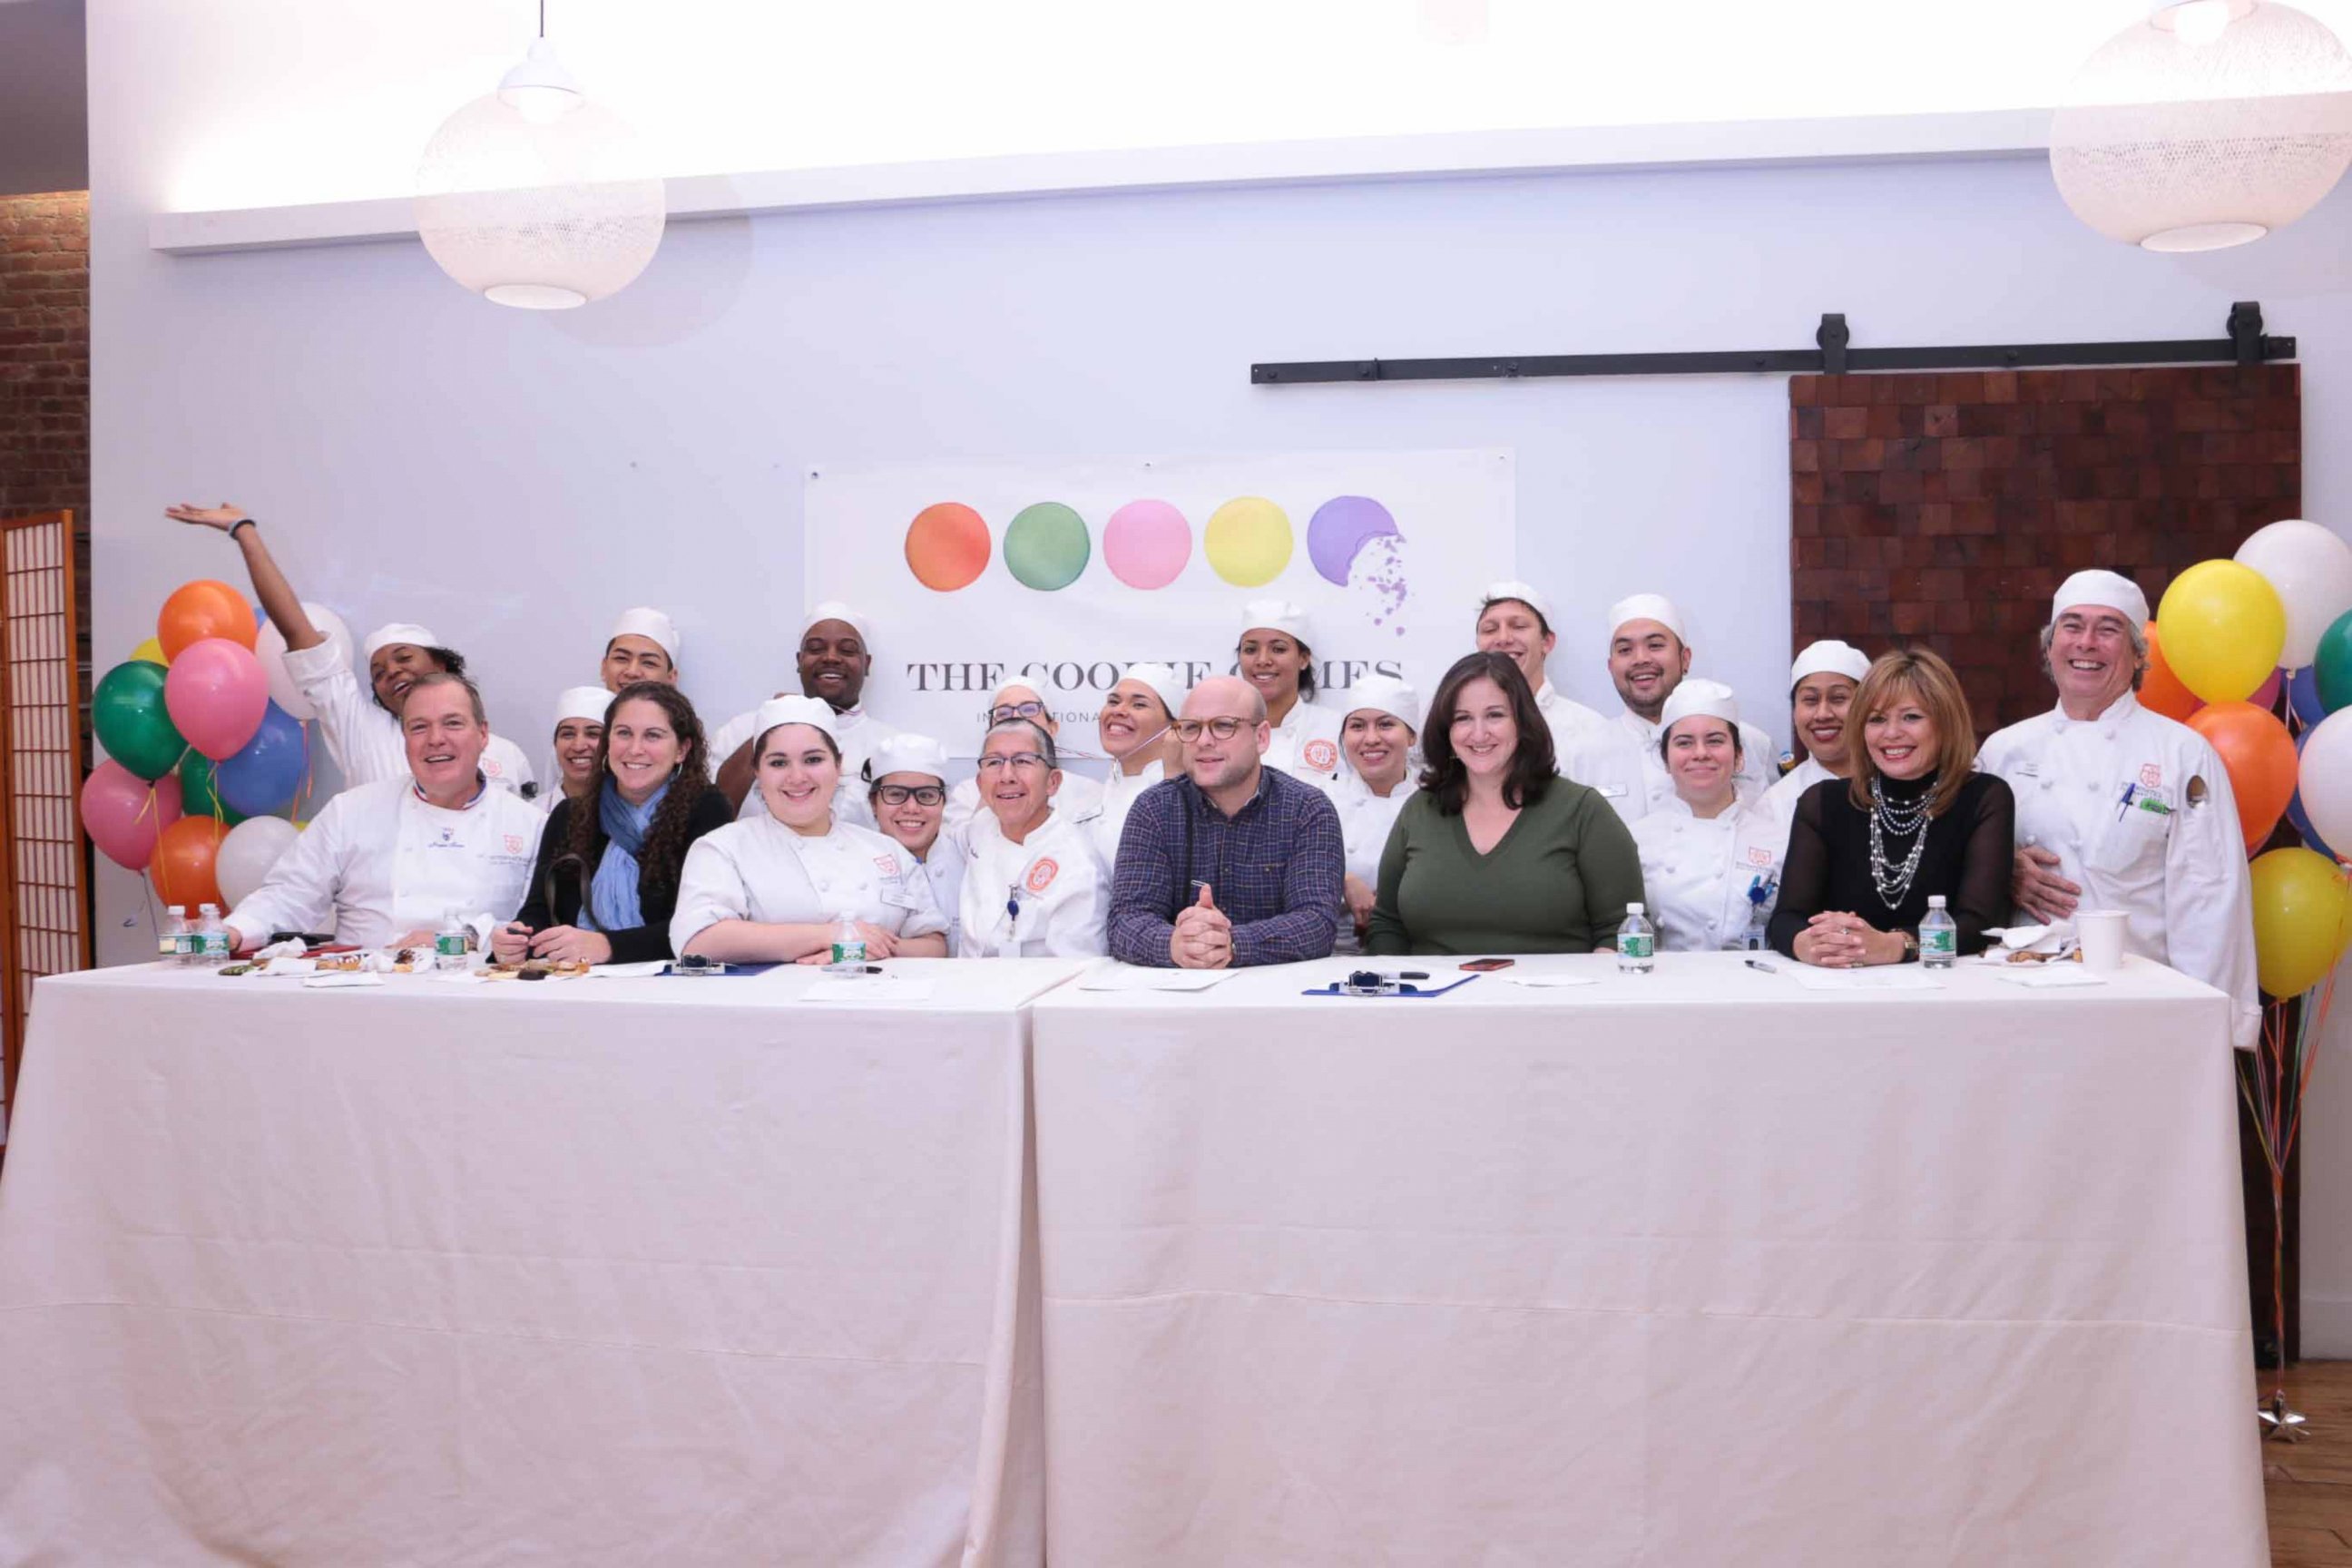 PHOTO:  All the judges and contestants at the International Culinary Center's Cookie Games.